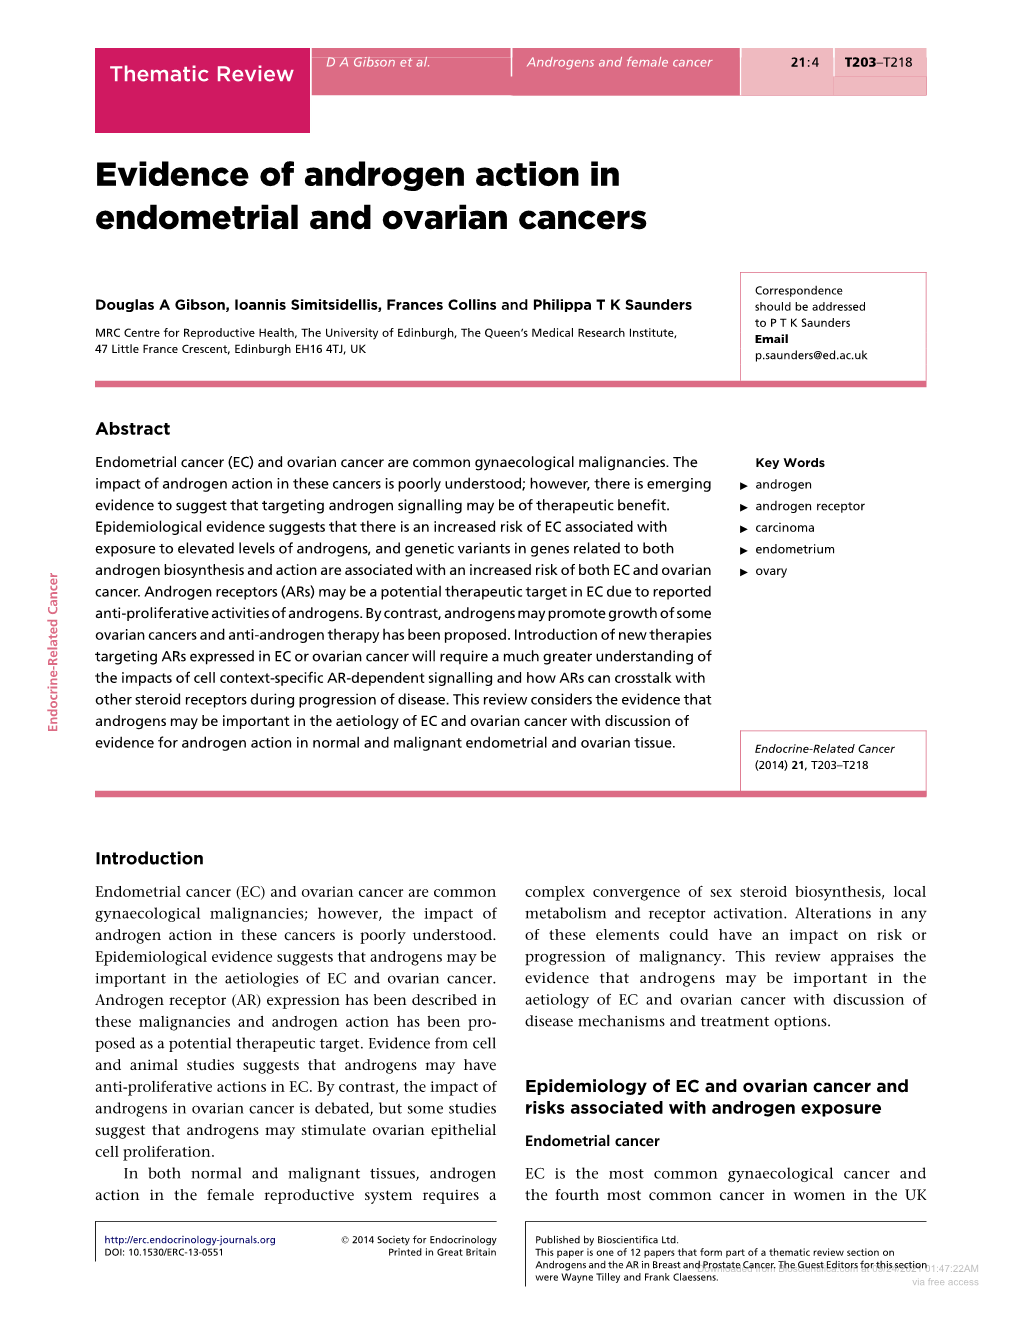 Evidence of Androgen Action in Endometrial and Ovarian Cancers